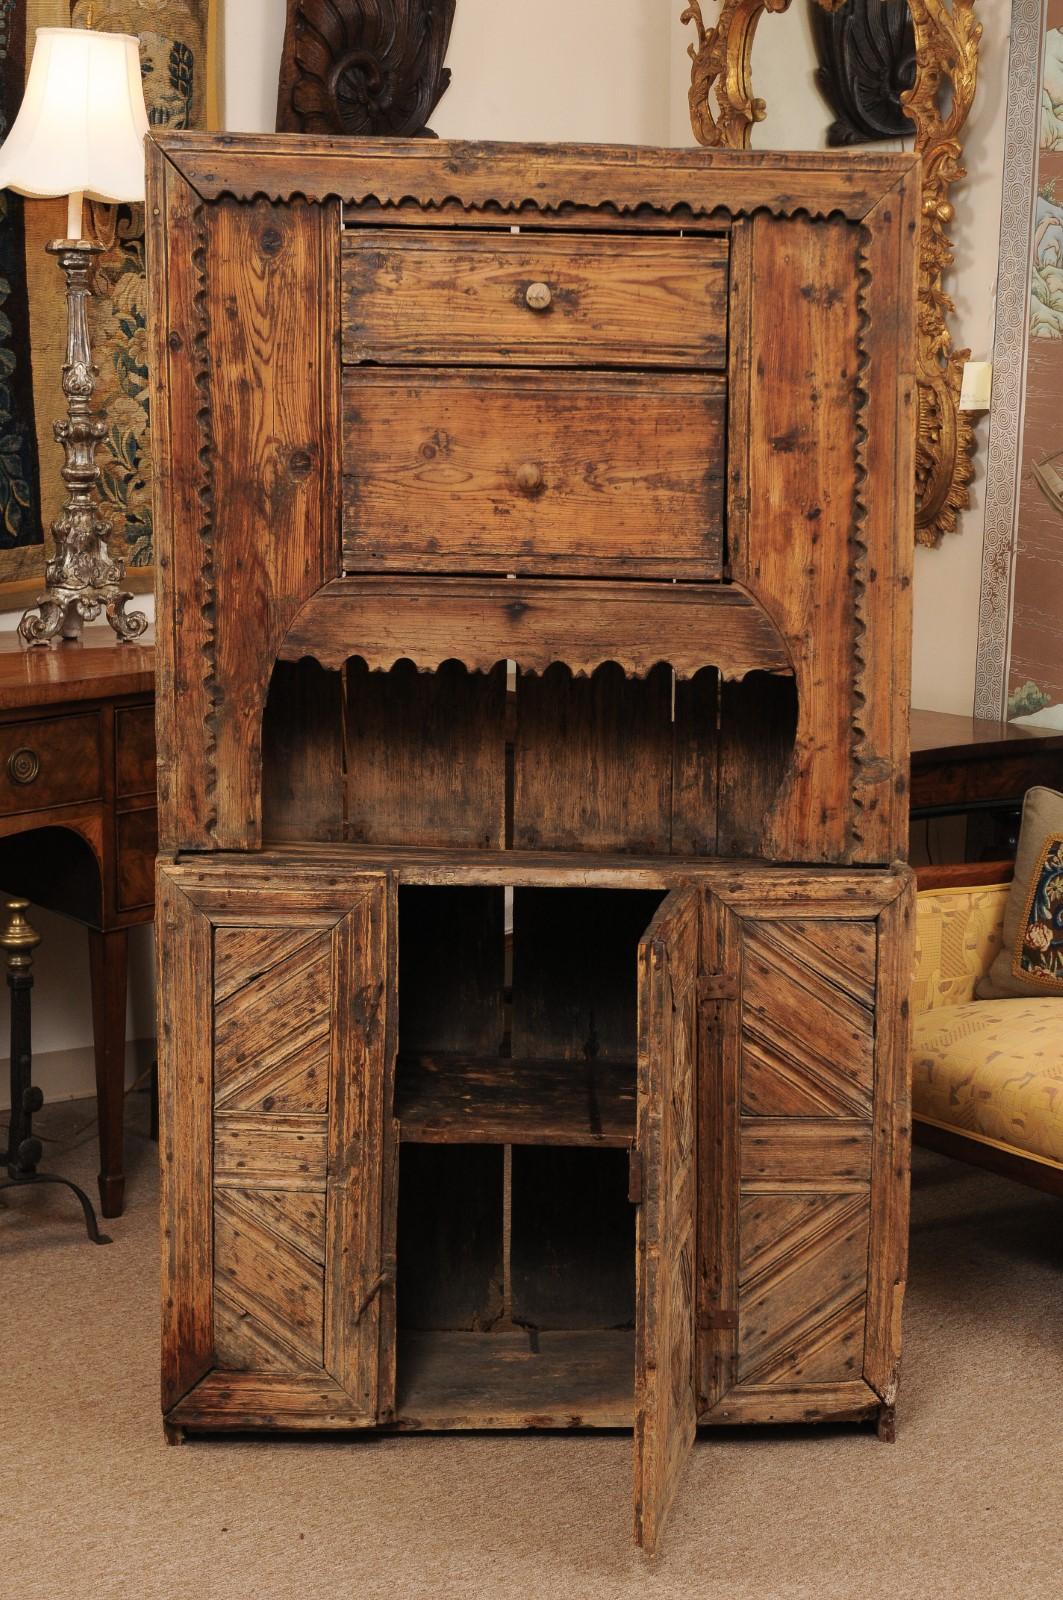 17th Century Spanish Pine Cabinet with 2 Drawers & Open Shelf above Cabinet Door In Good Condition For Sale In Atlanta, GA